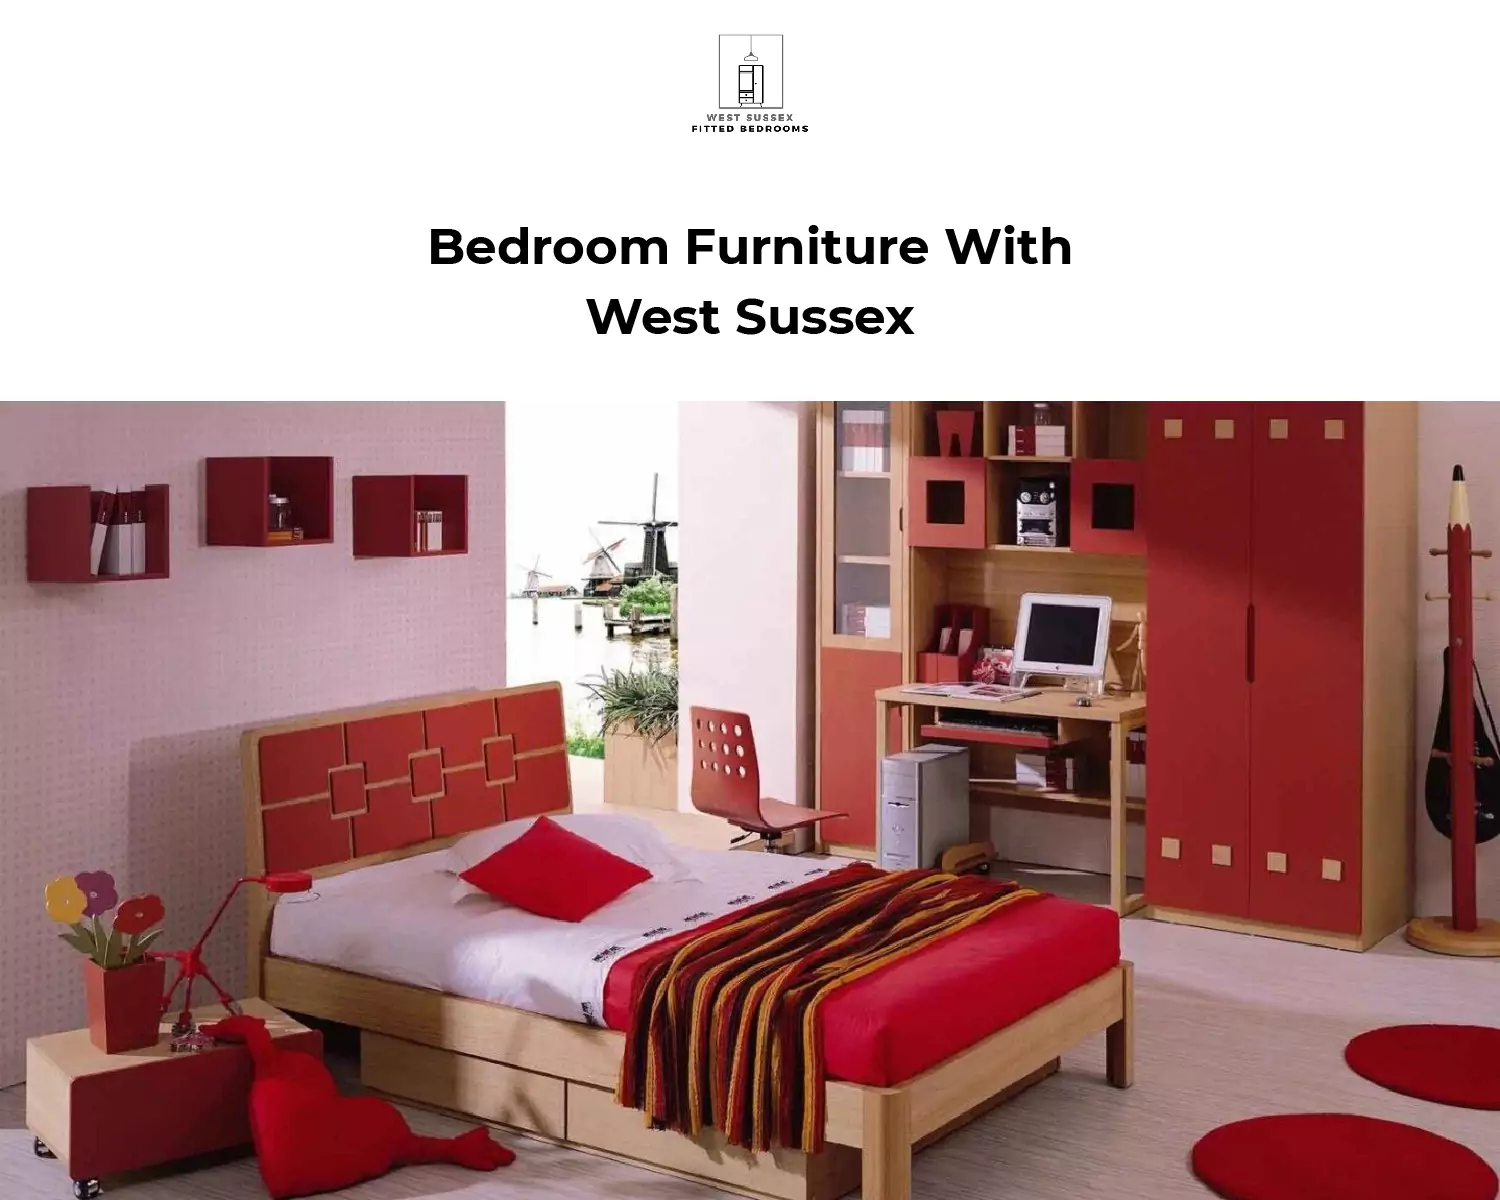 Bedroom Furniture With West Sussex